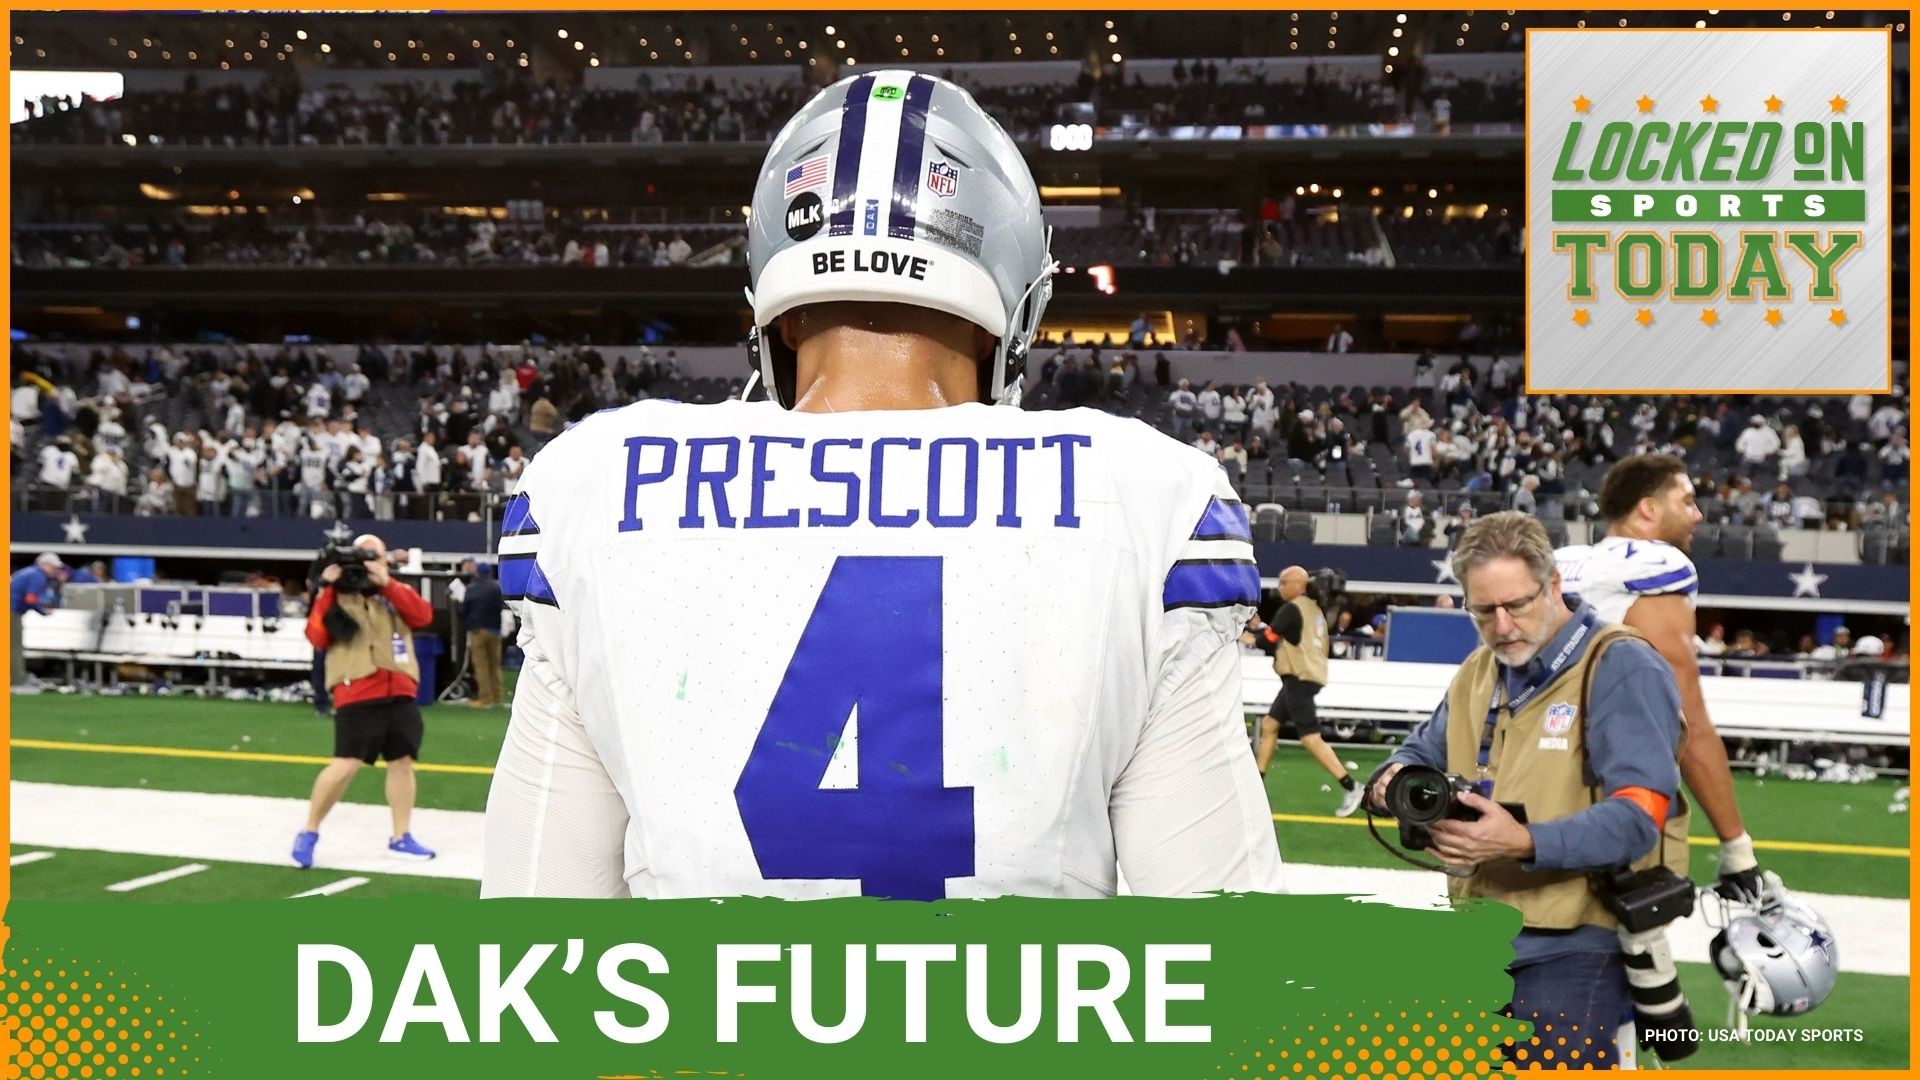 Discussing the day's top sports stories from Dak Prescott's future to overthinking another quarterback prospect in the NFL draft and more.